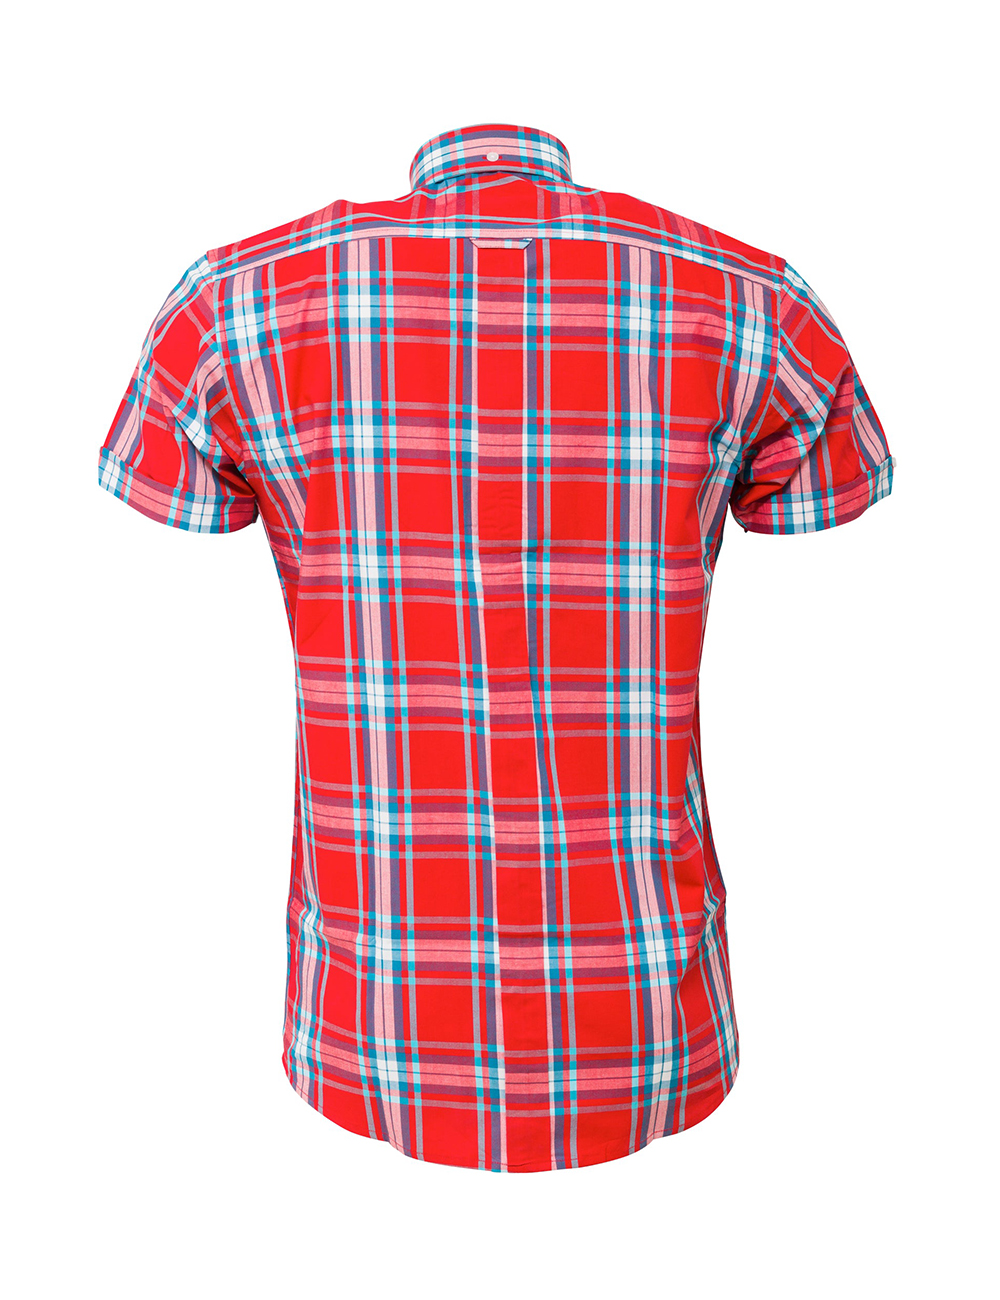 Relco Red Check Short Sleeve Shirt